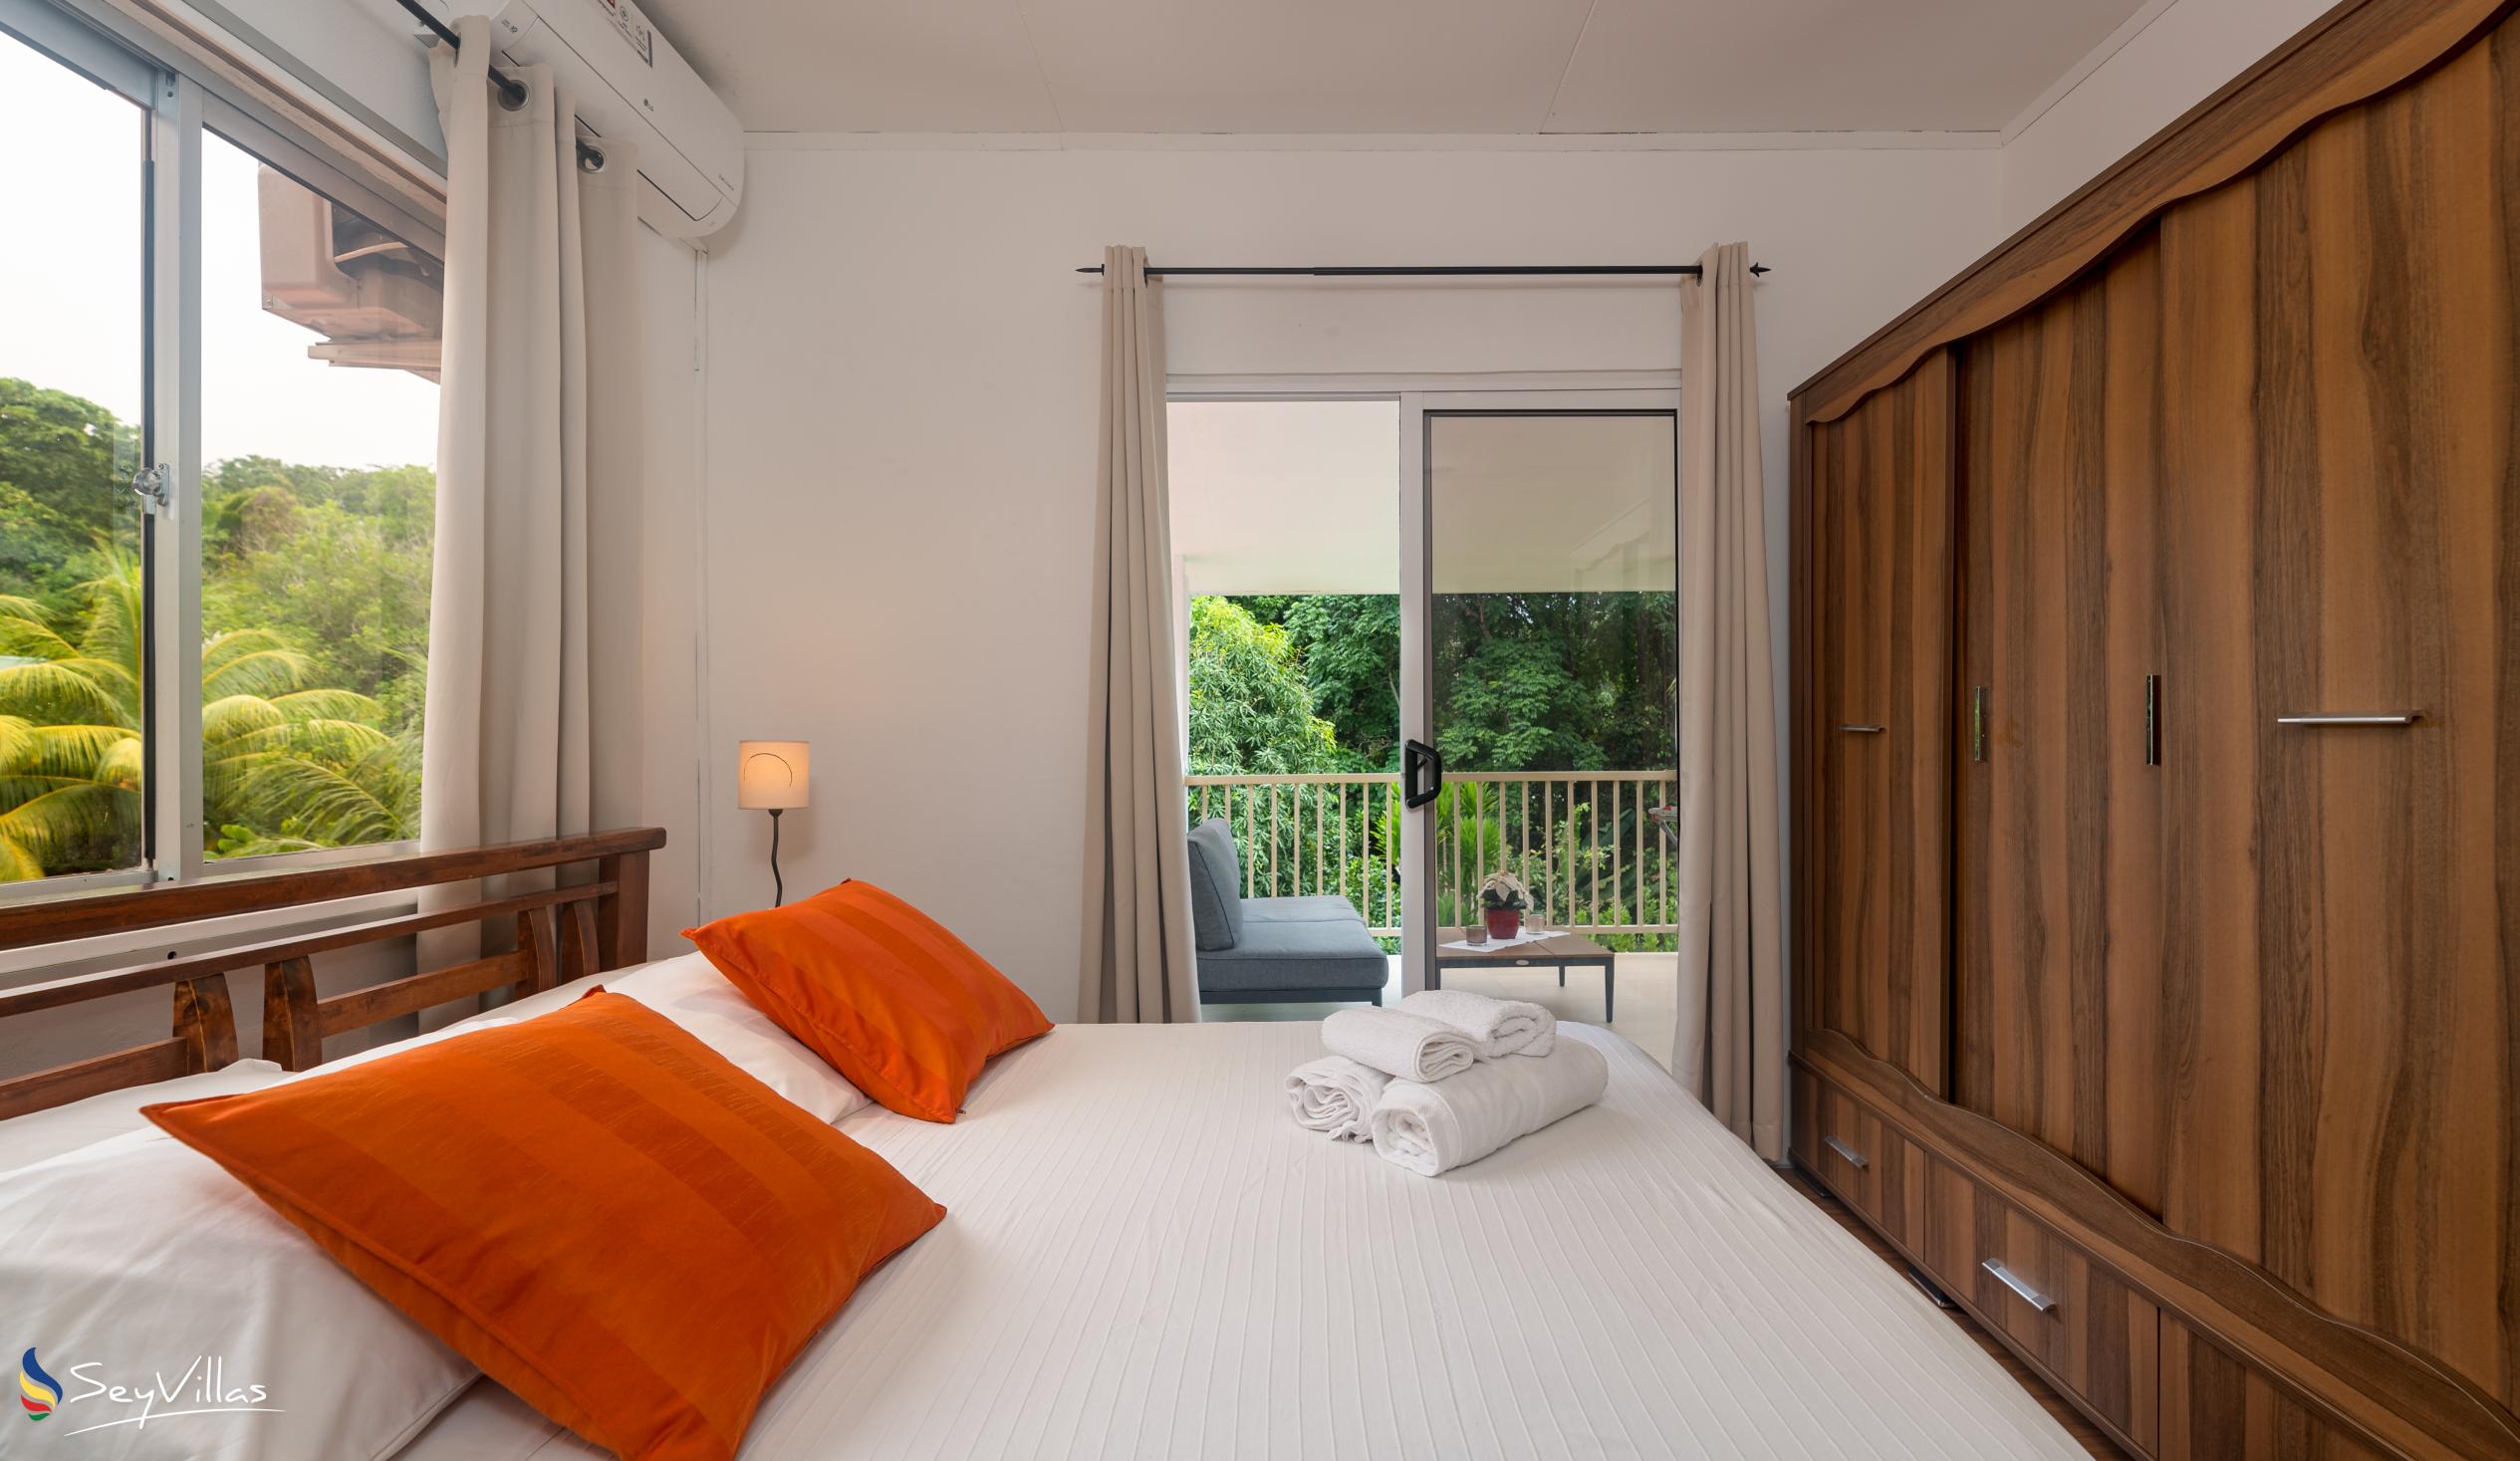 Foto 62: The Orchard Holiday Home - Chambre Queen - Mahé (Seychelles)